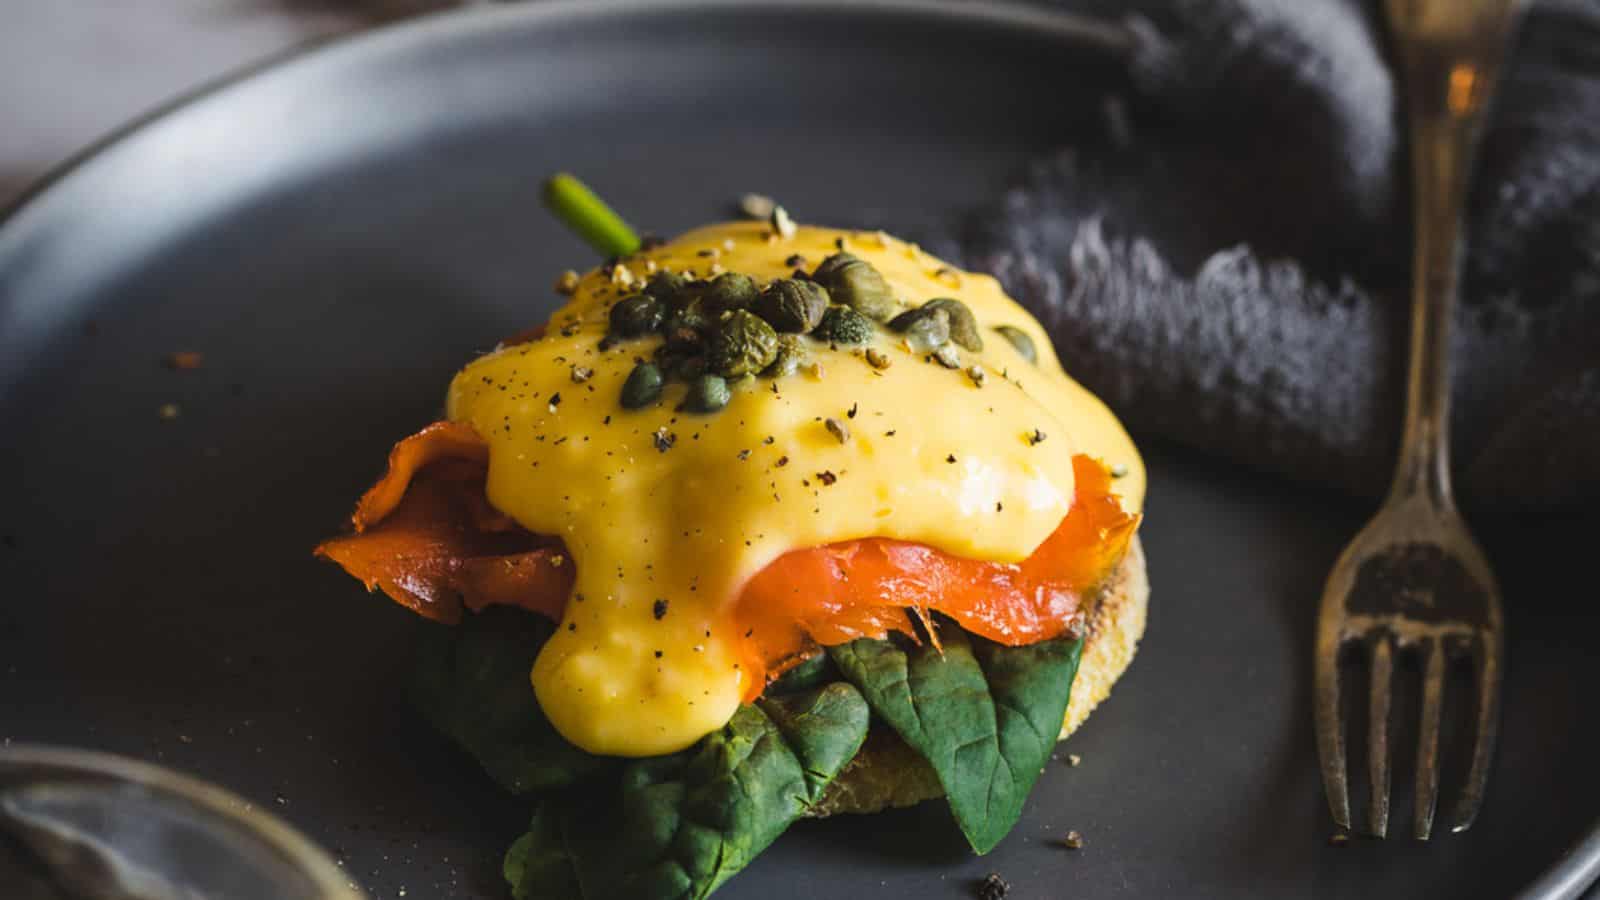 A person holding an eggs benedict with salmon and capers on a plate.